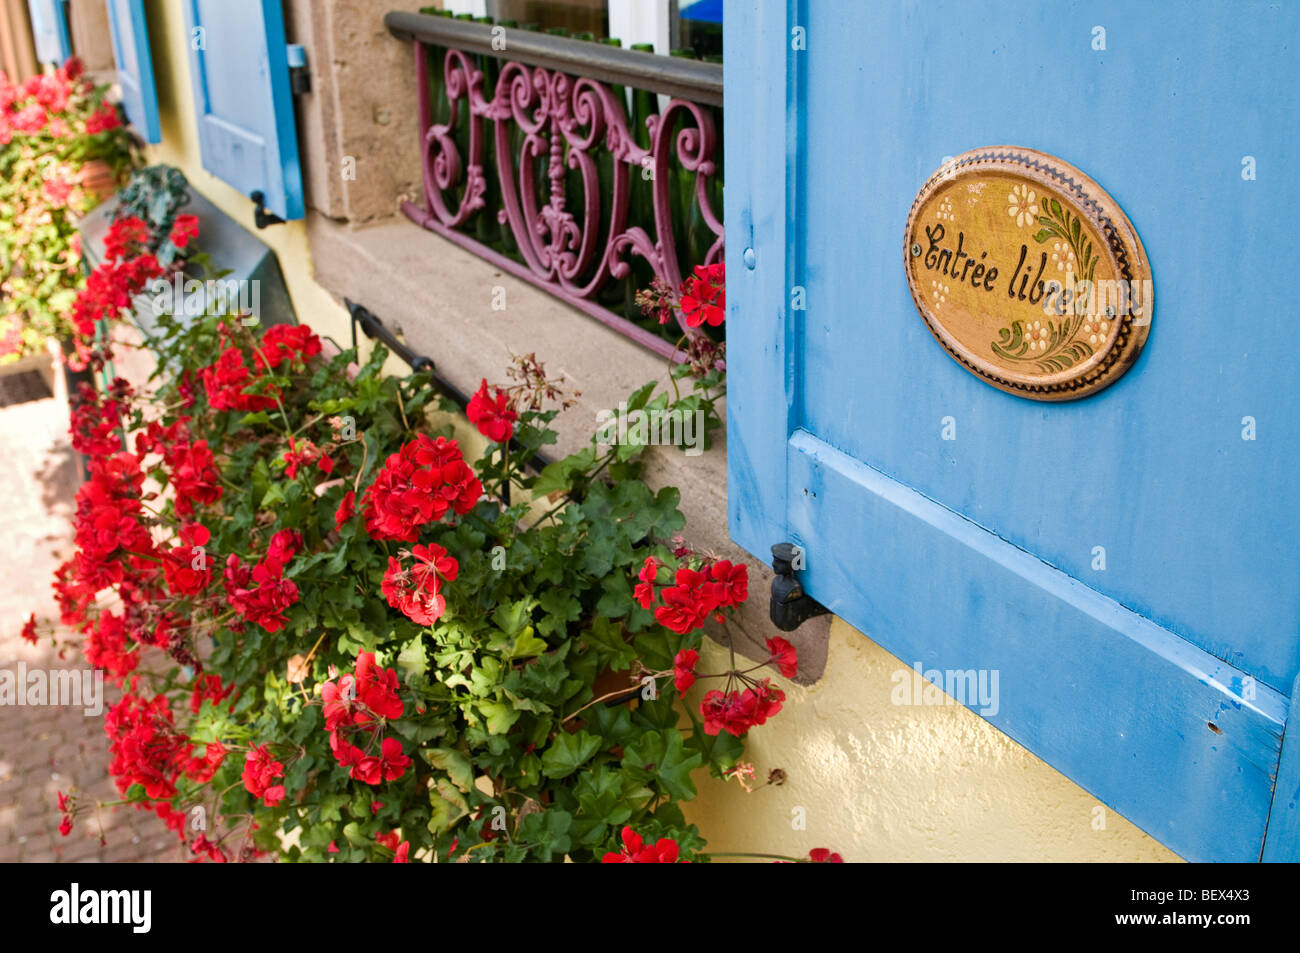 Typical picturesque shutters flowers and 'Entree Libre' sign outside wine store in Alsace France Stock Photo